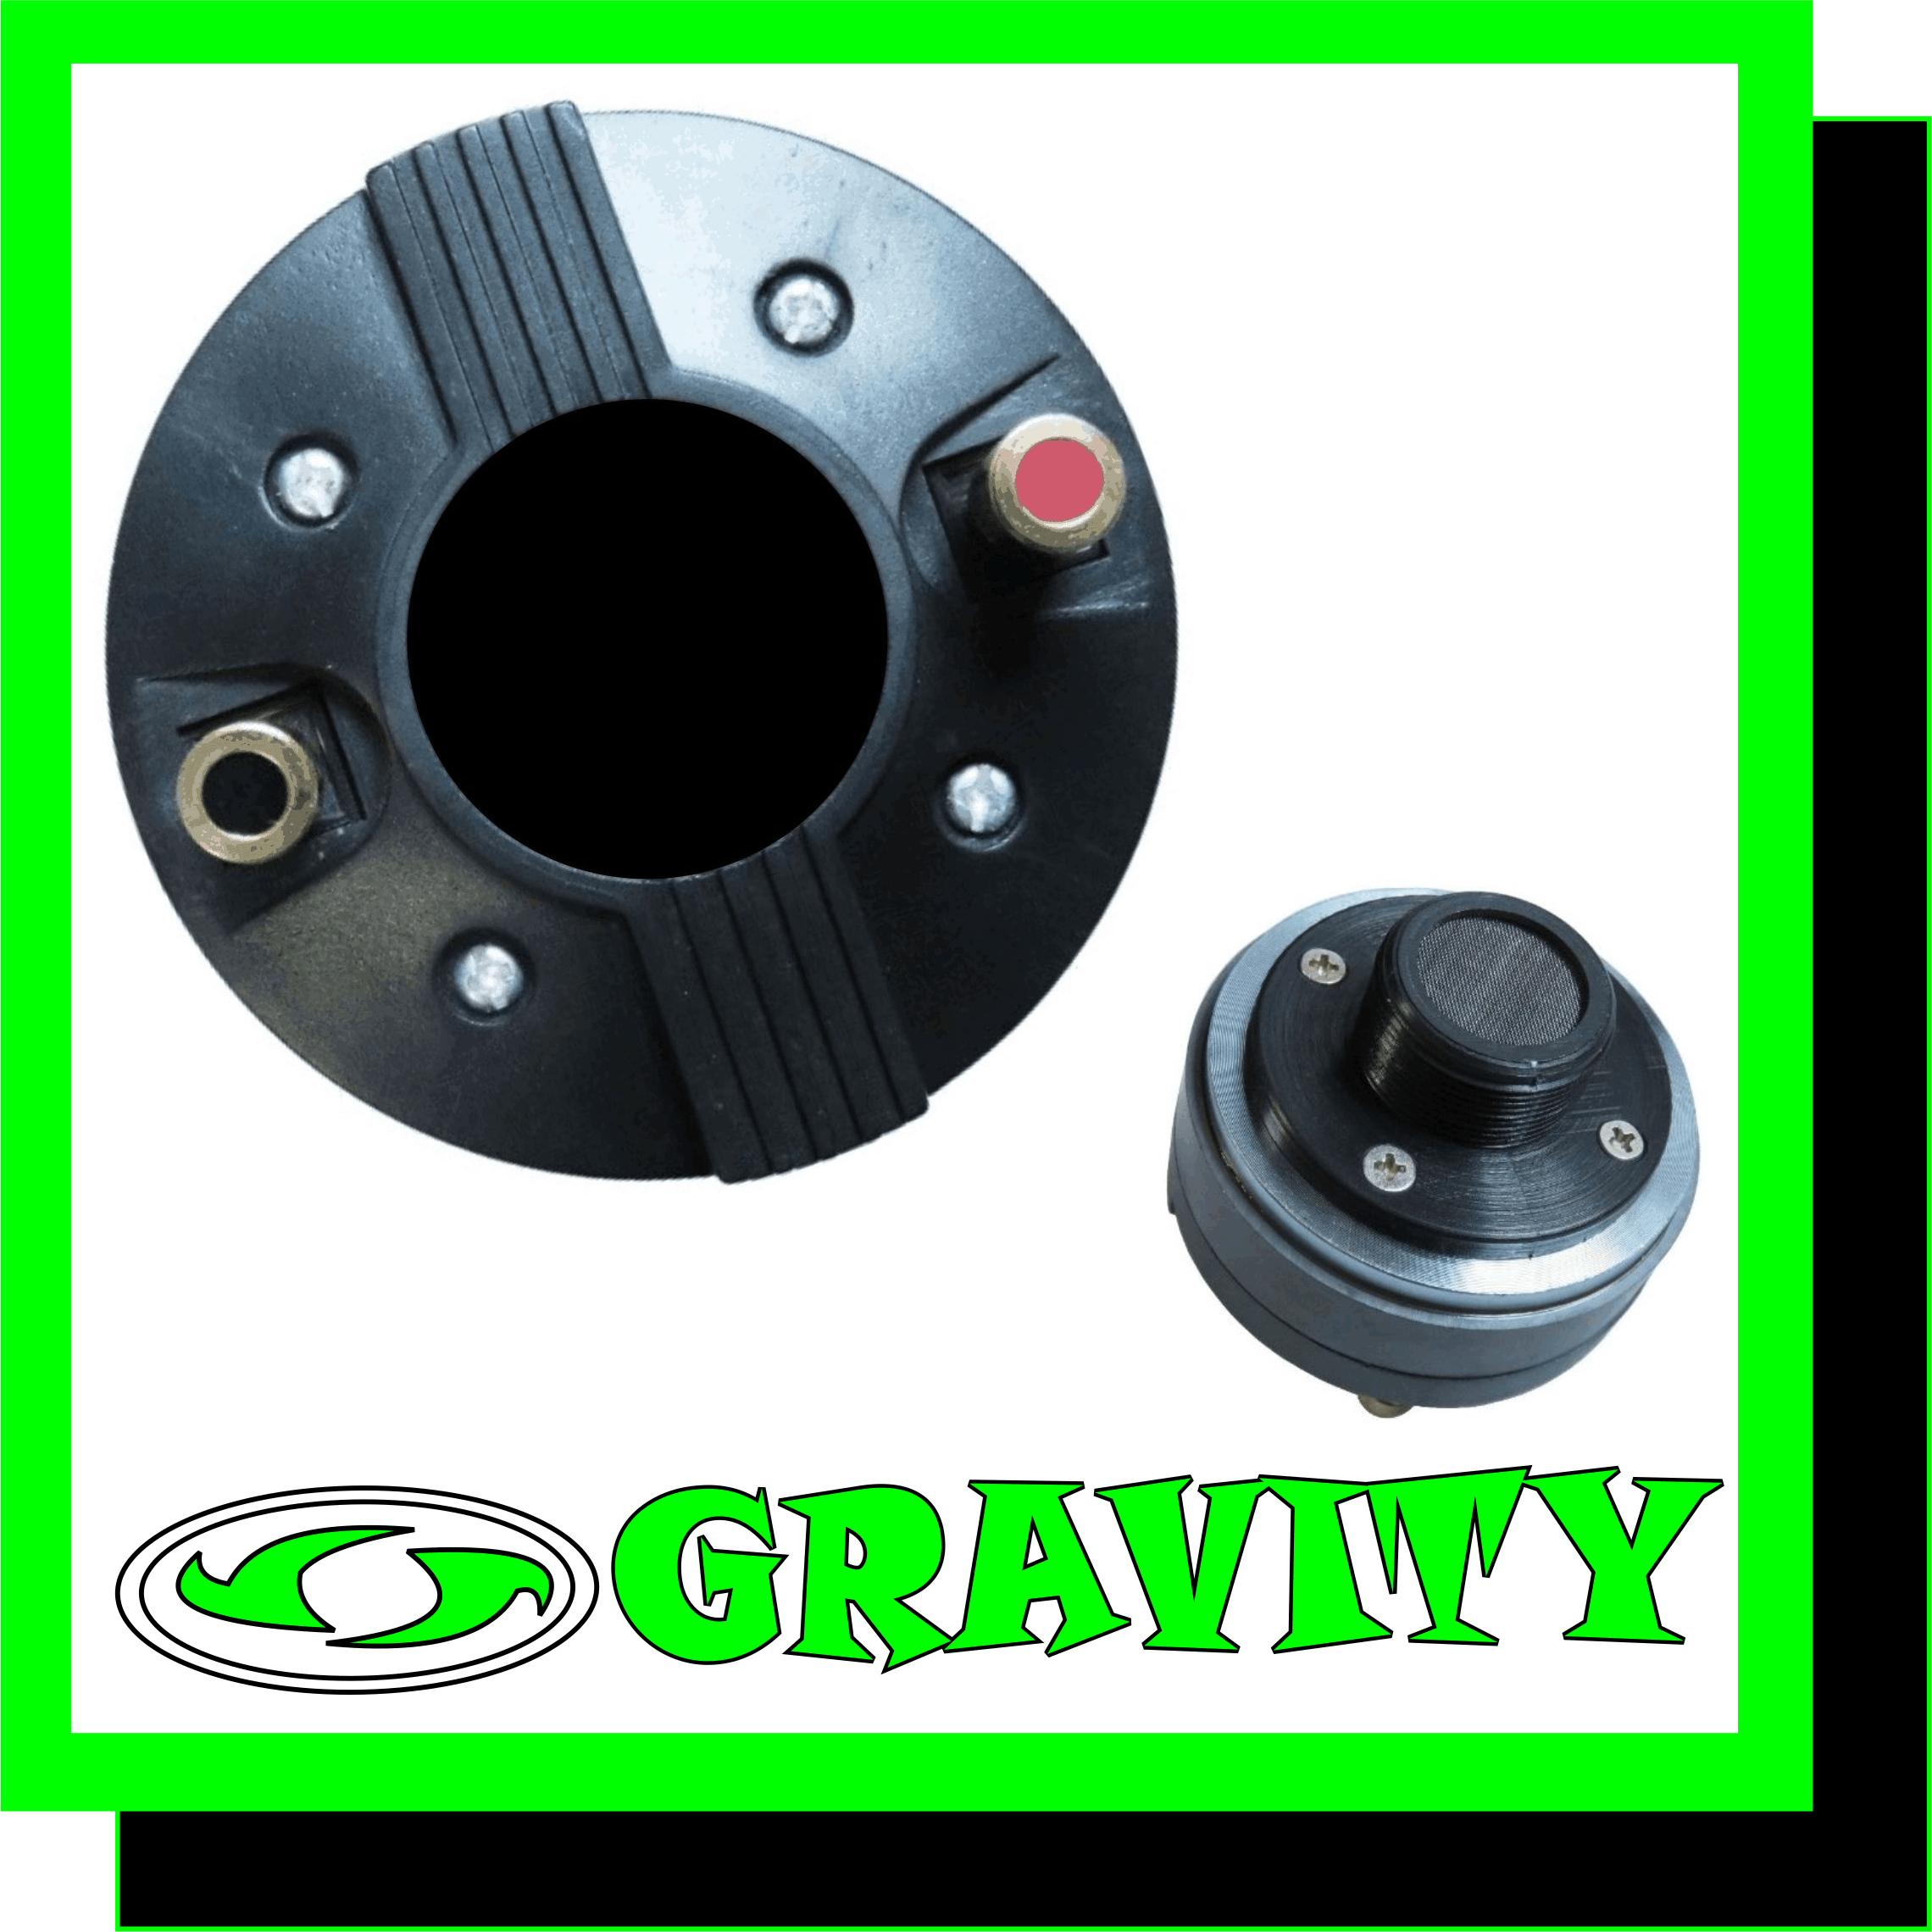 40w 25mm compression super tweeter replacement drivers JBL samson wharfedale citronic peavey replacement tweeter drivers gravity dj store 0315072463